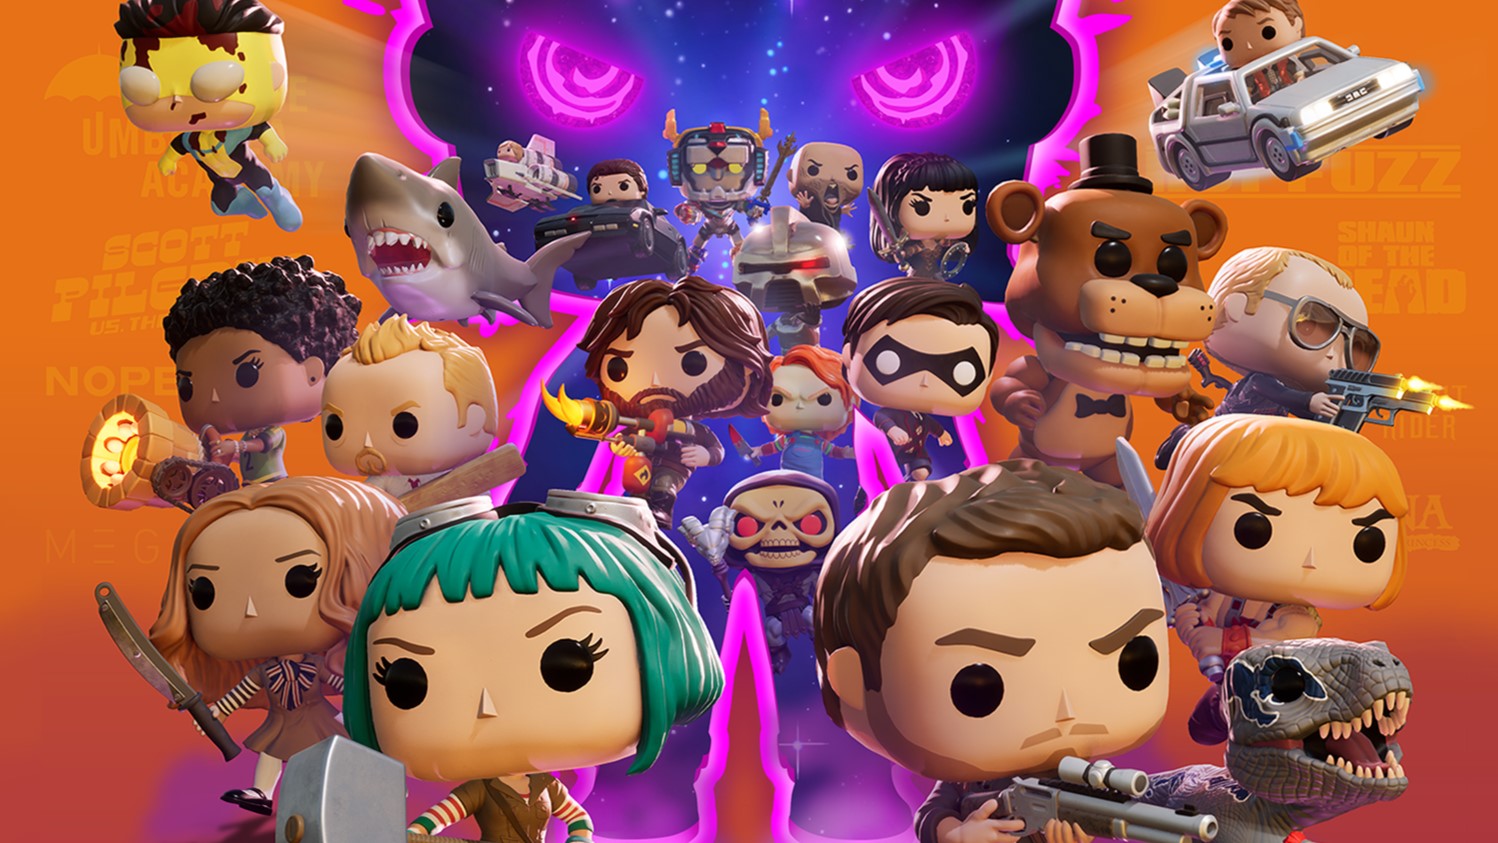 Funko Fusion mashes up The Thing, Hot Fuzz, Nope, and much more